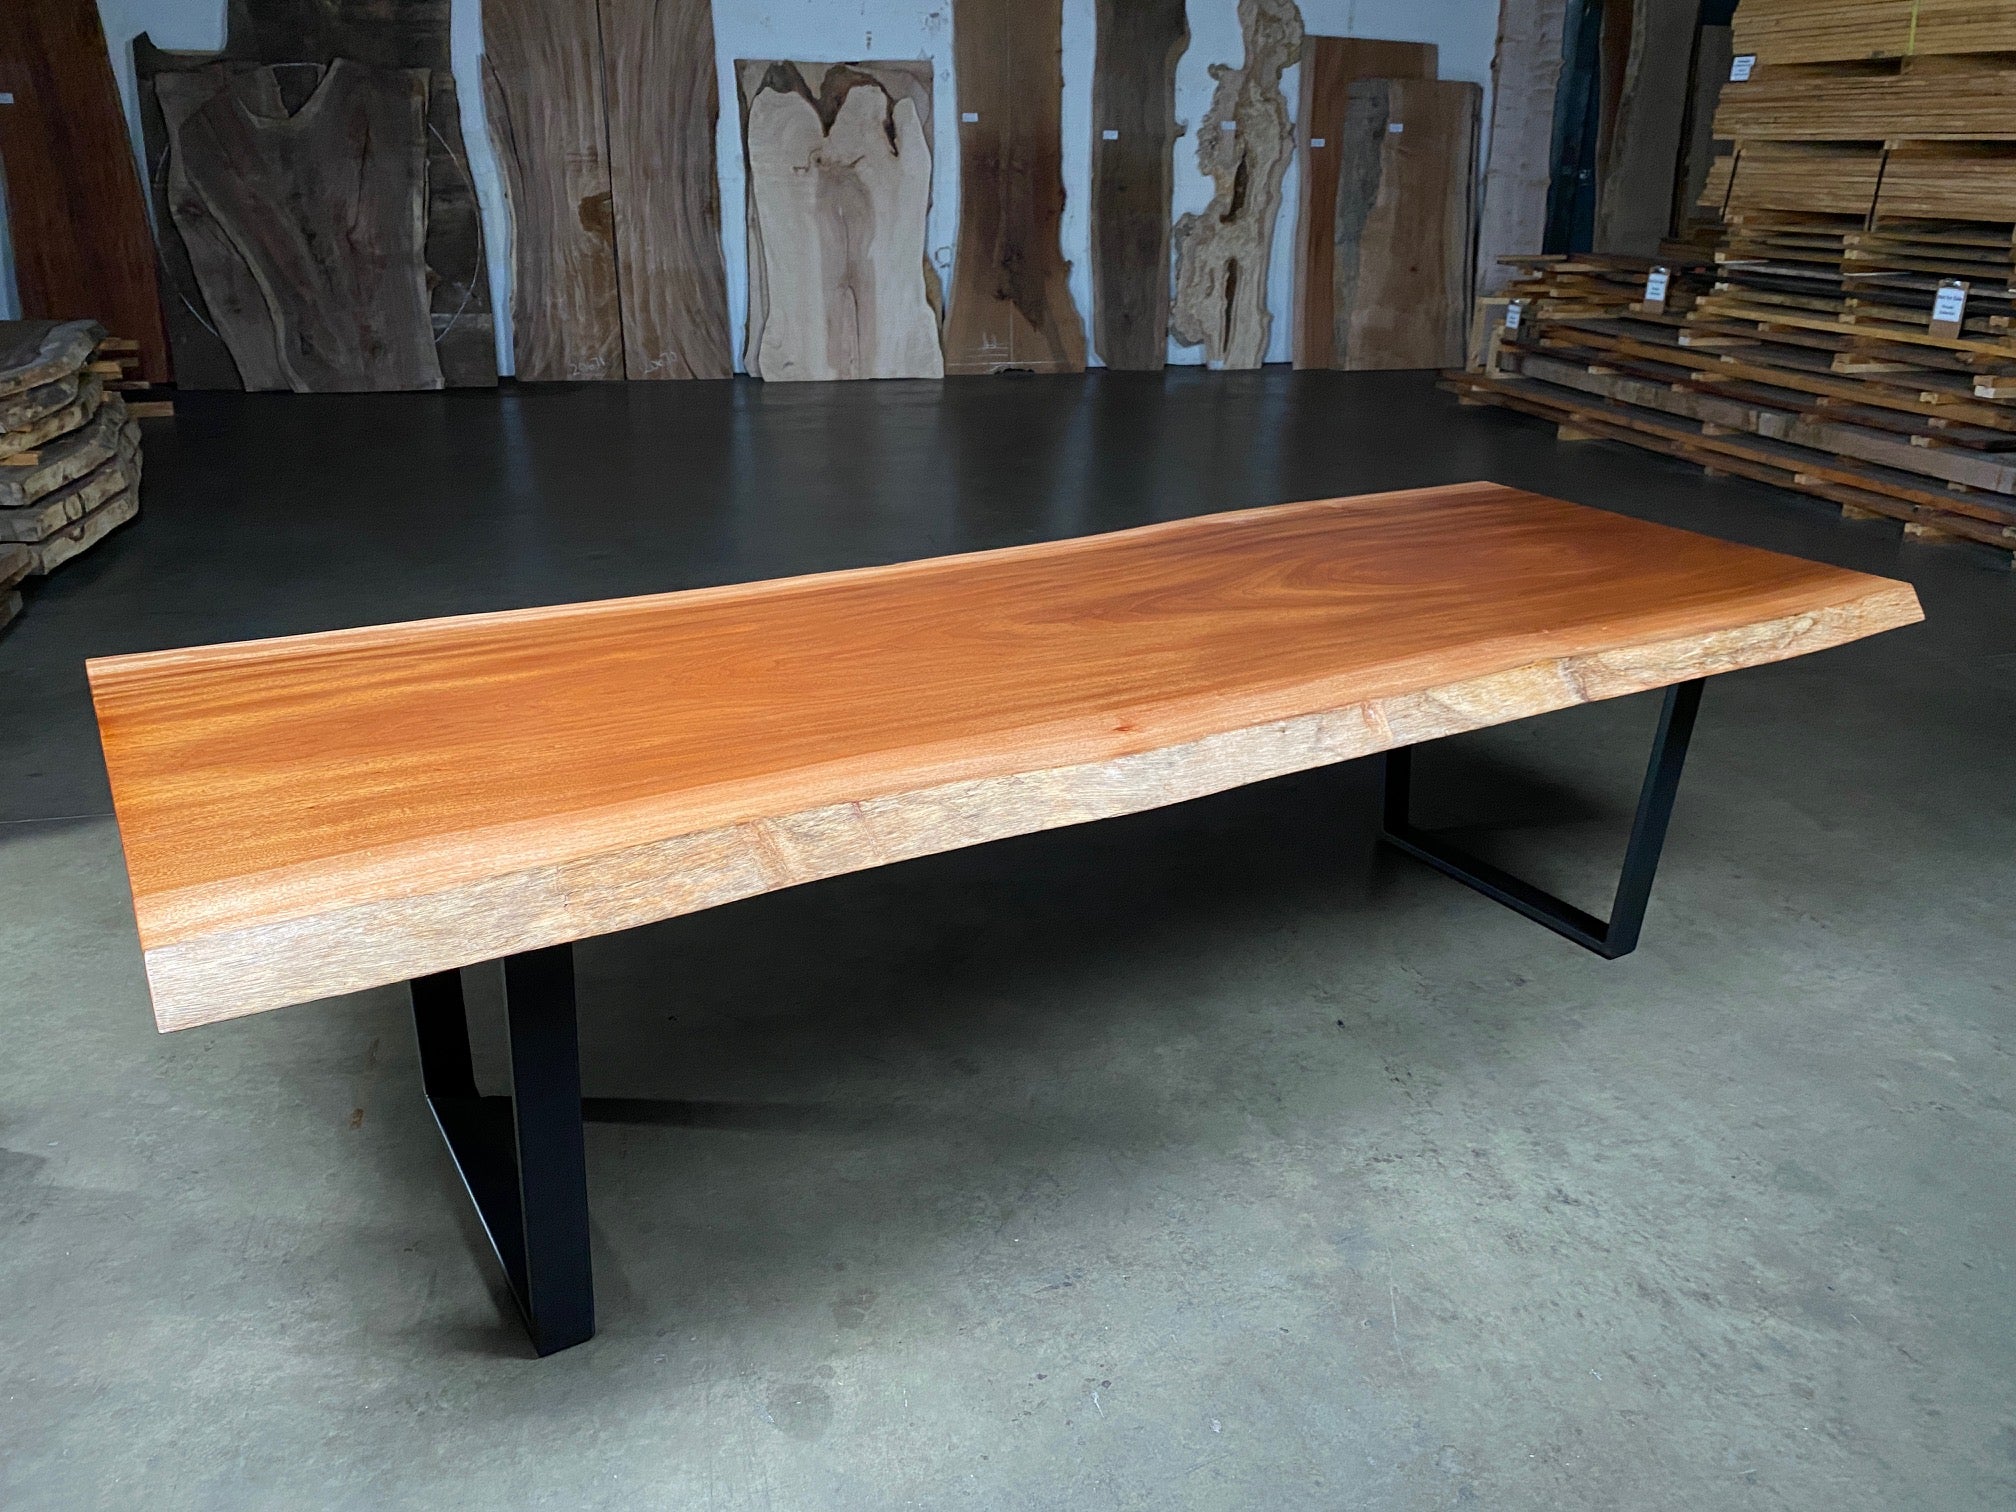 African Mahogany Sipo Live Edge Table by CS Woods